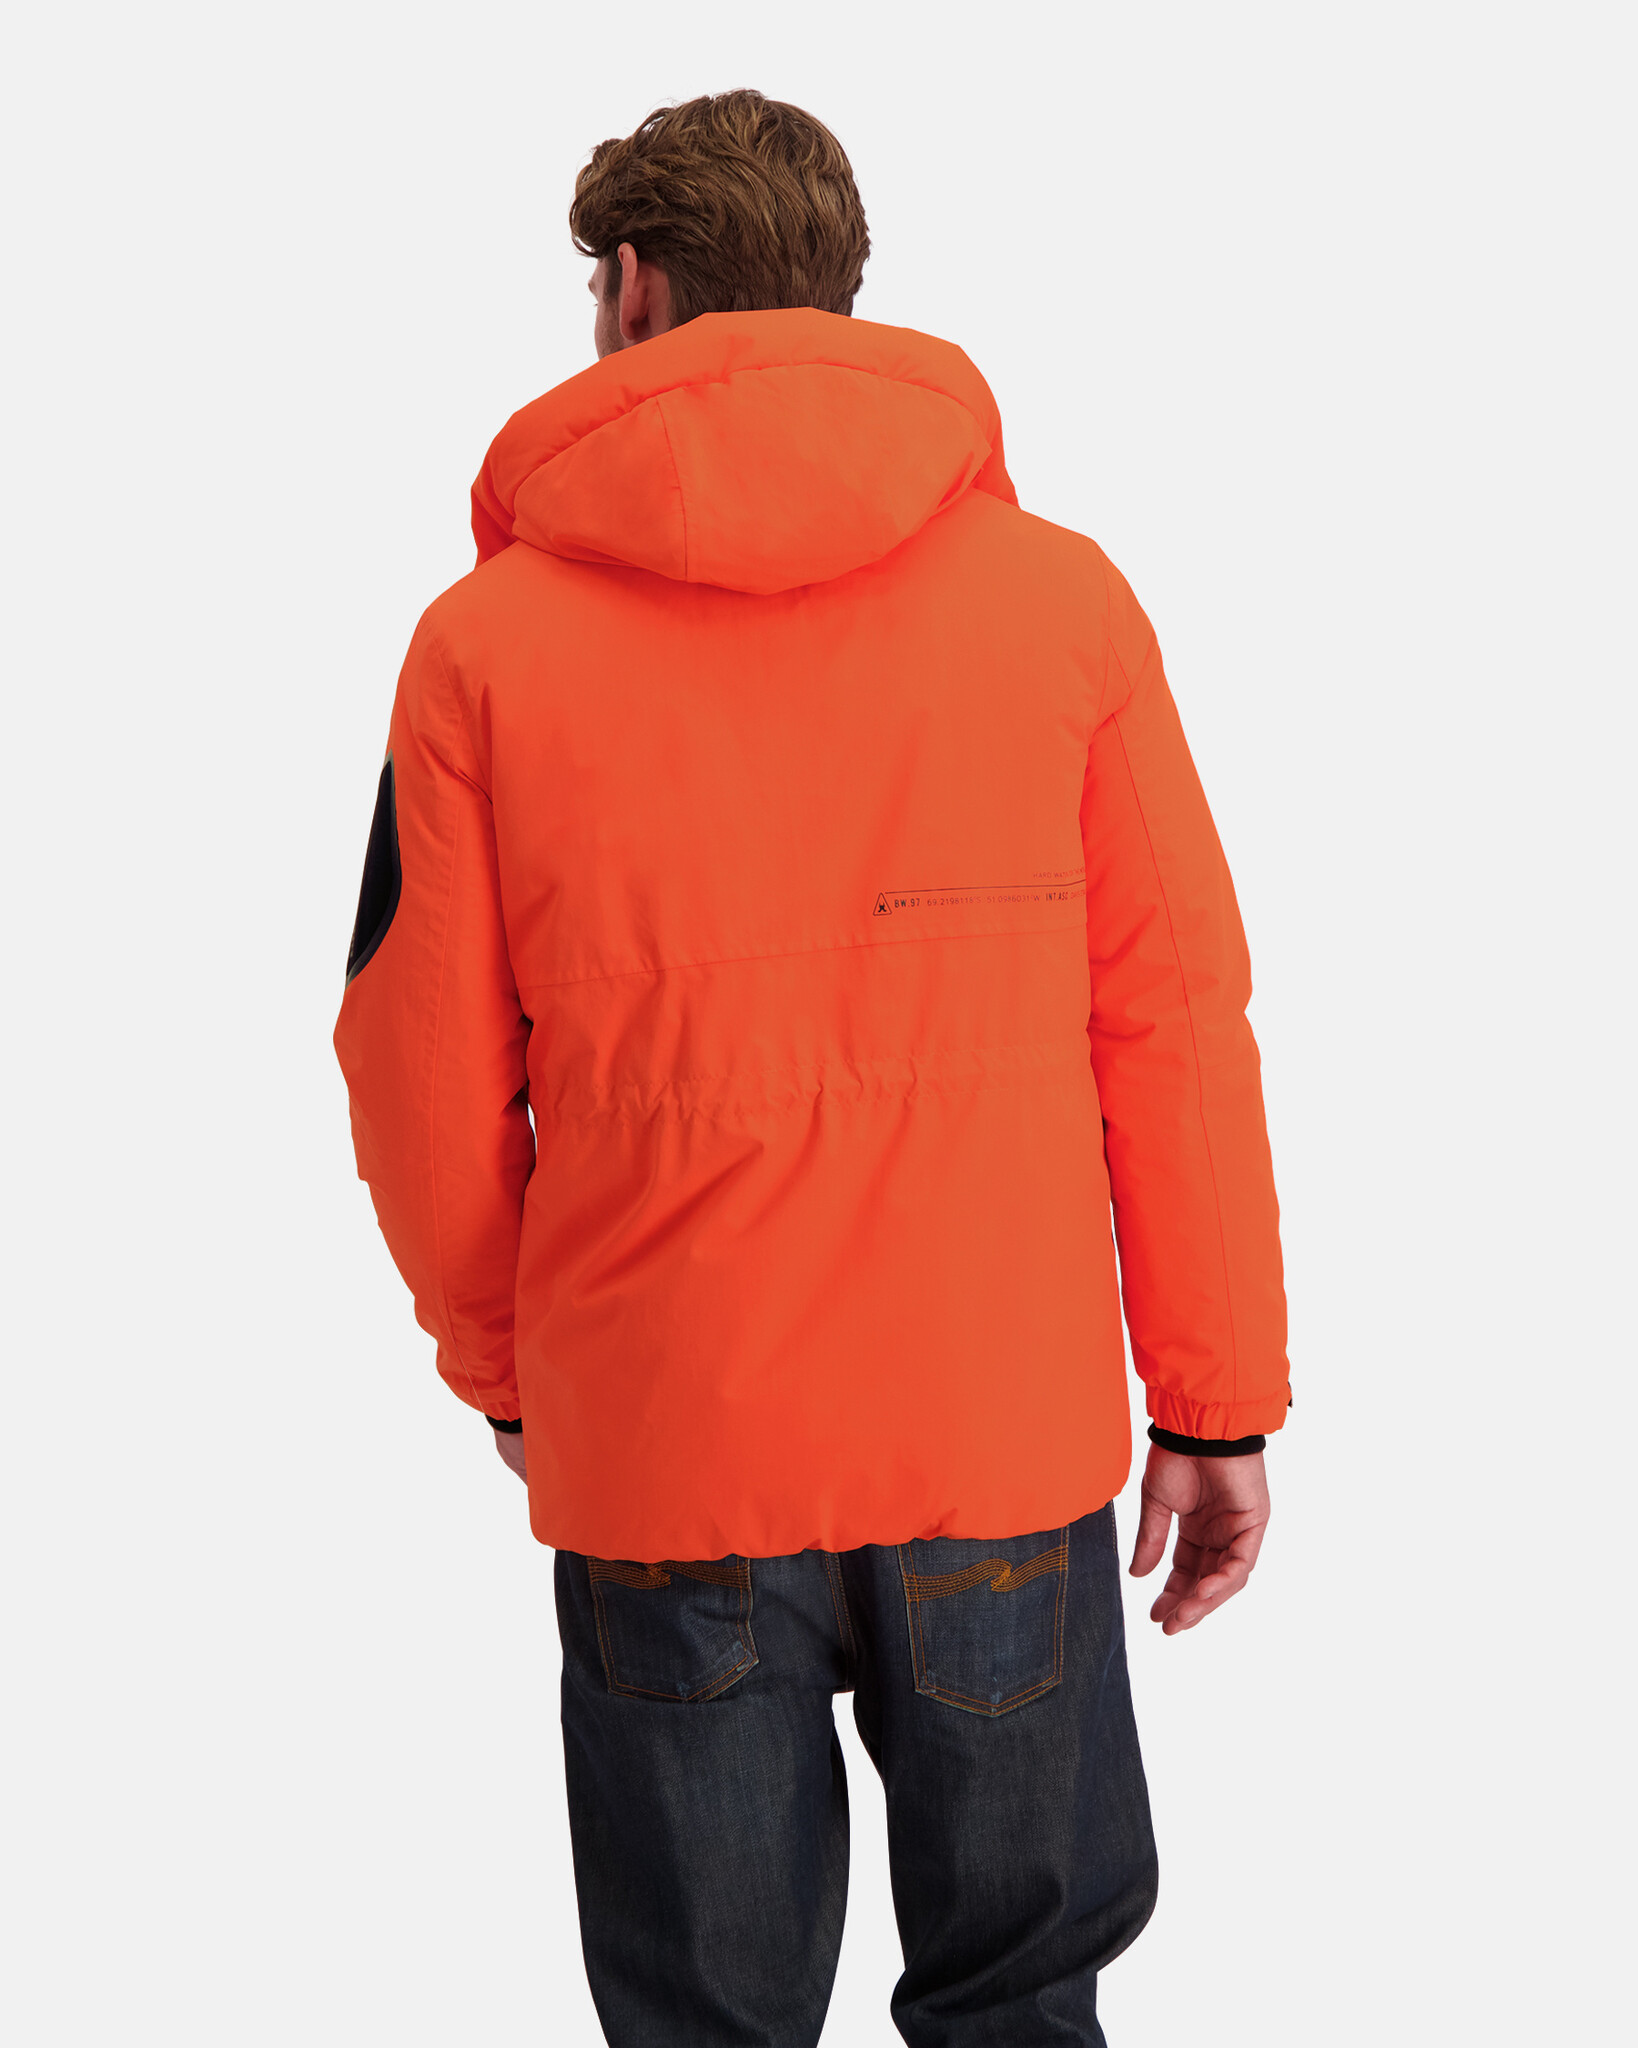 Waterproof parka jacket with fixed hood, technical 2-layer fabric with REPREVE® padding